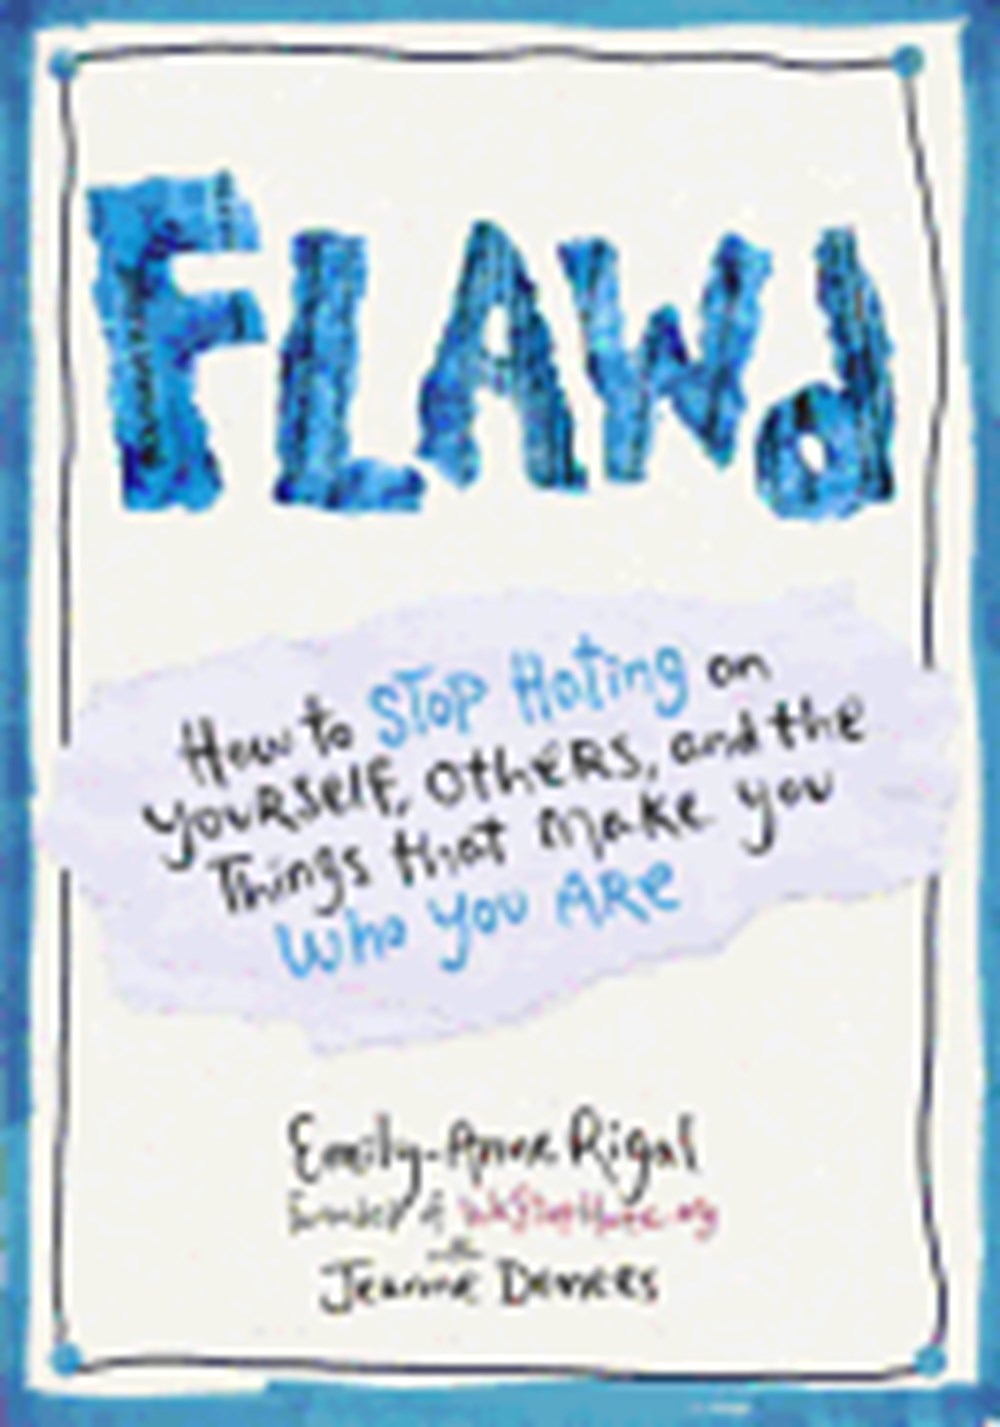 Flawd How to Stop Hating on Yourself, Others, and the Things That Make You Who You Are